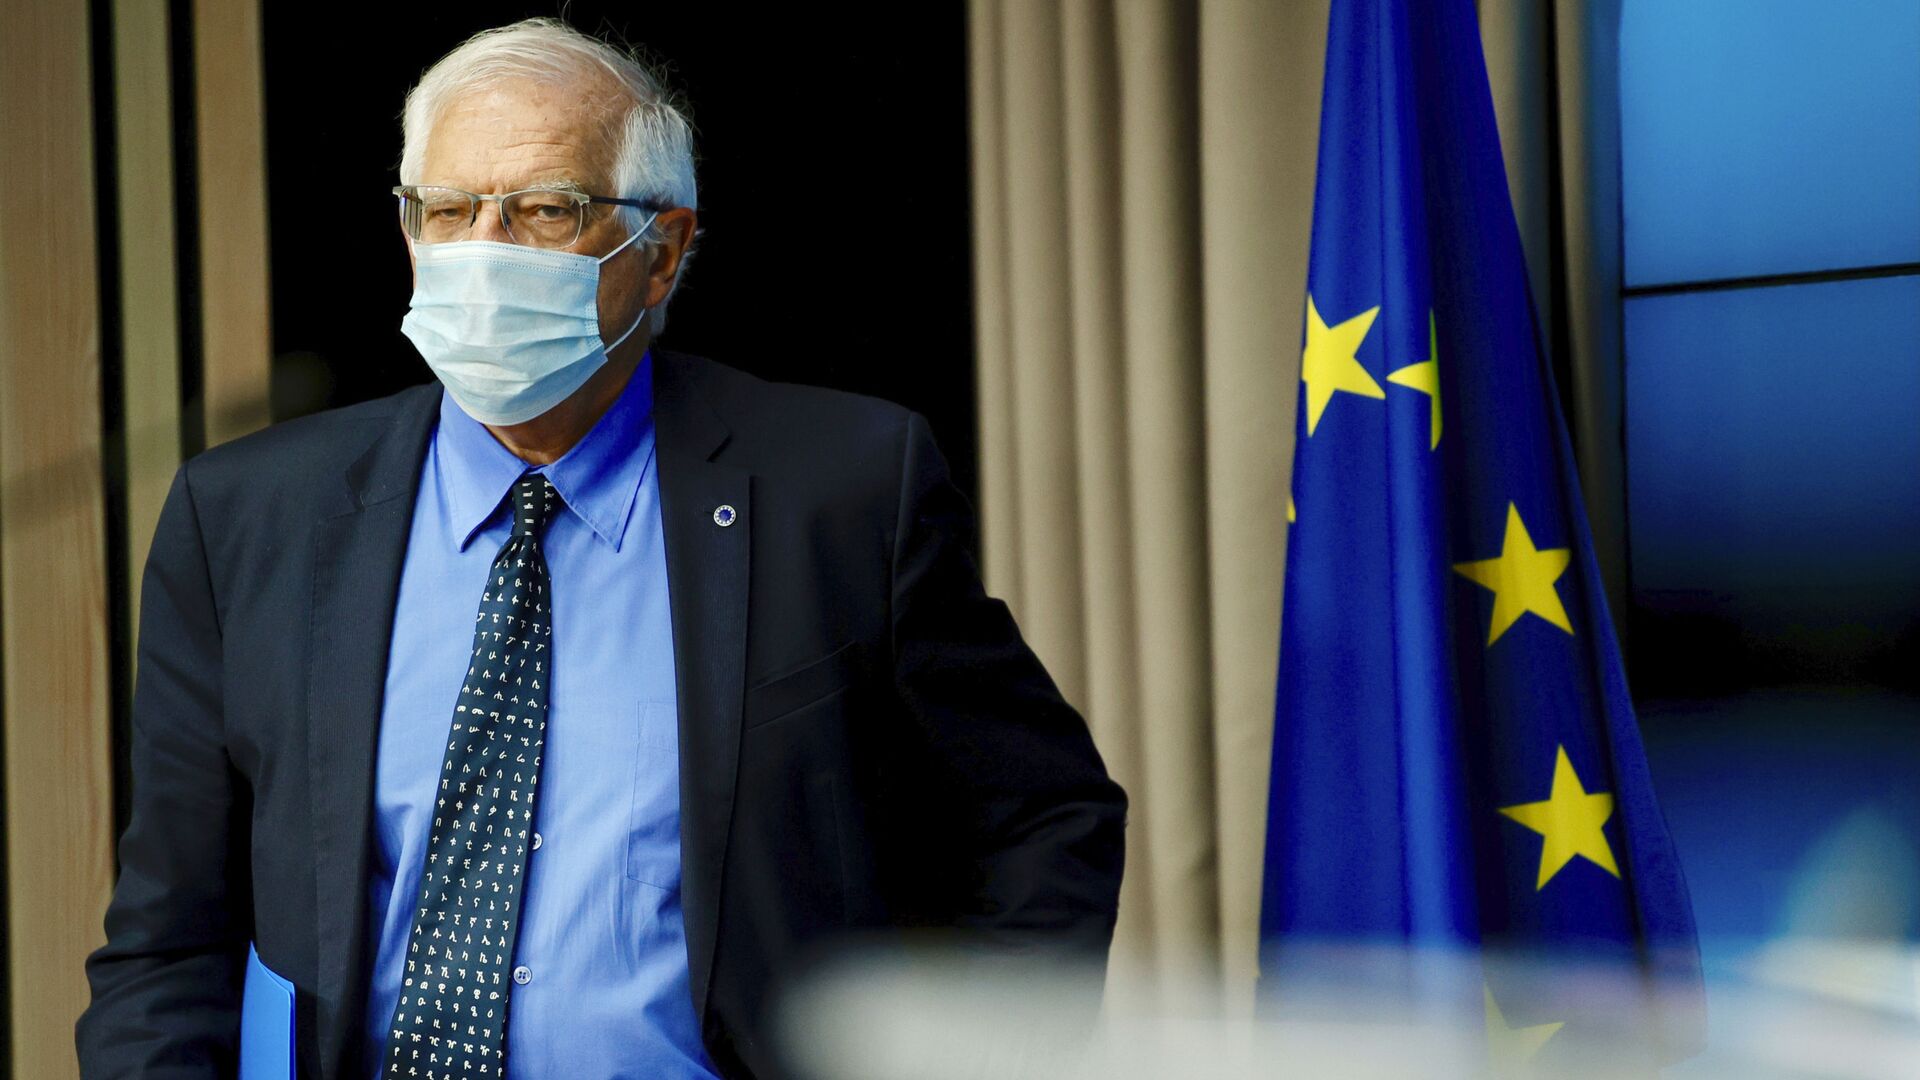 European Union foreign policy chief Josep Borrell arrives for a media conference after a meeting of EU foreign ministers at the European Council building in Brussels, Monday, May 10, 2021. - Sputnik International, 1920, 10.10.2022